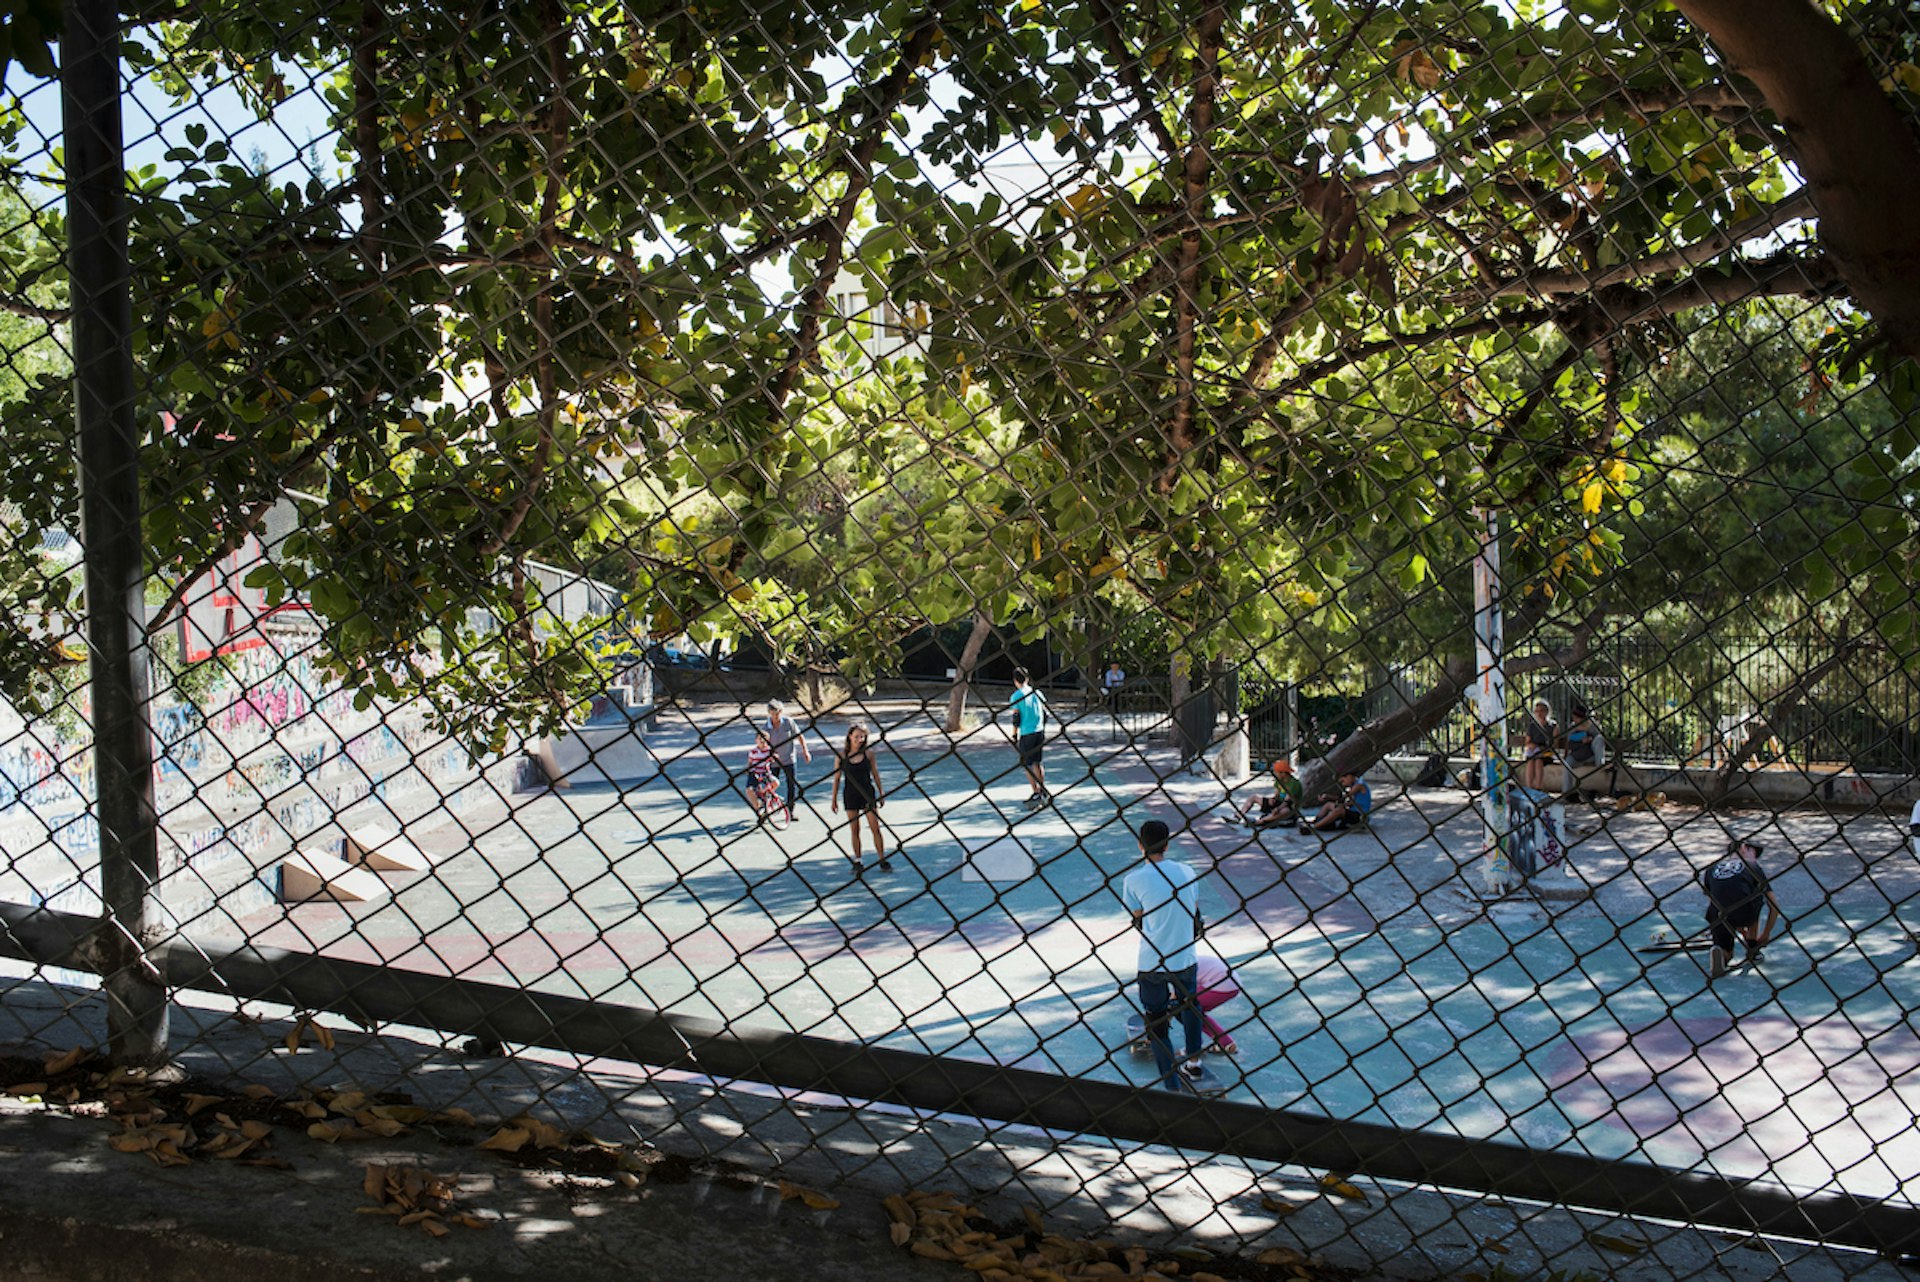 Refugee children taking skateboard classes at the Free Movement Skateboarding run by Will Ascott and Ruby Mateja in Exarhia, Athens.